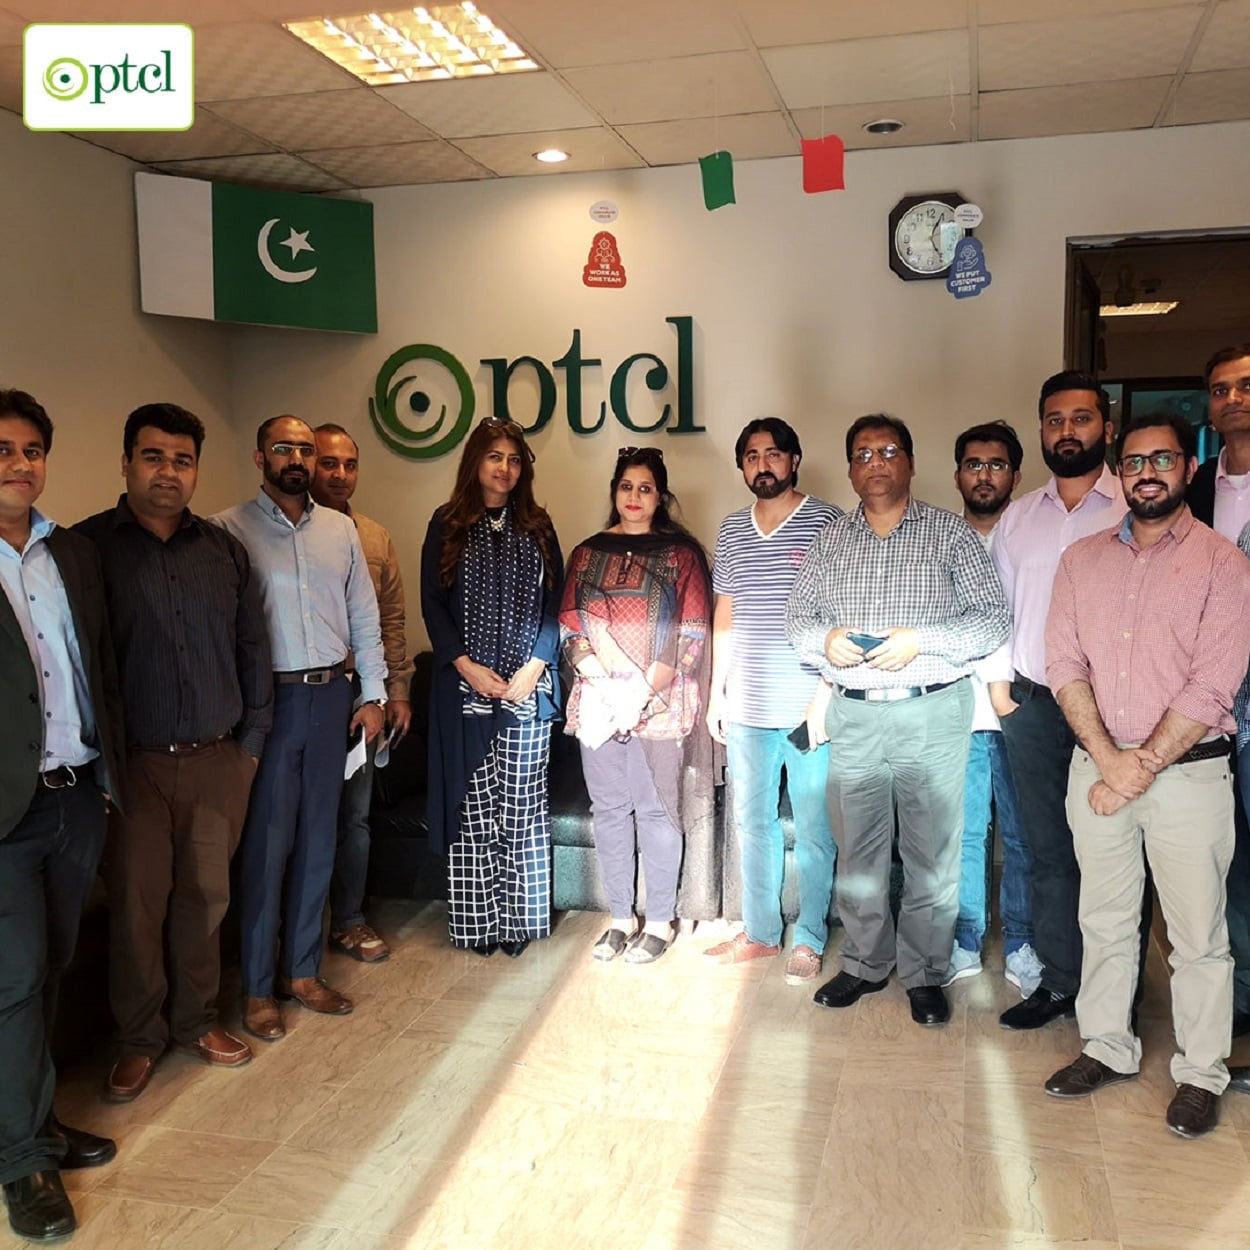 Digital Transformation with PTCL Smart Cloud solutions & Data Centers